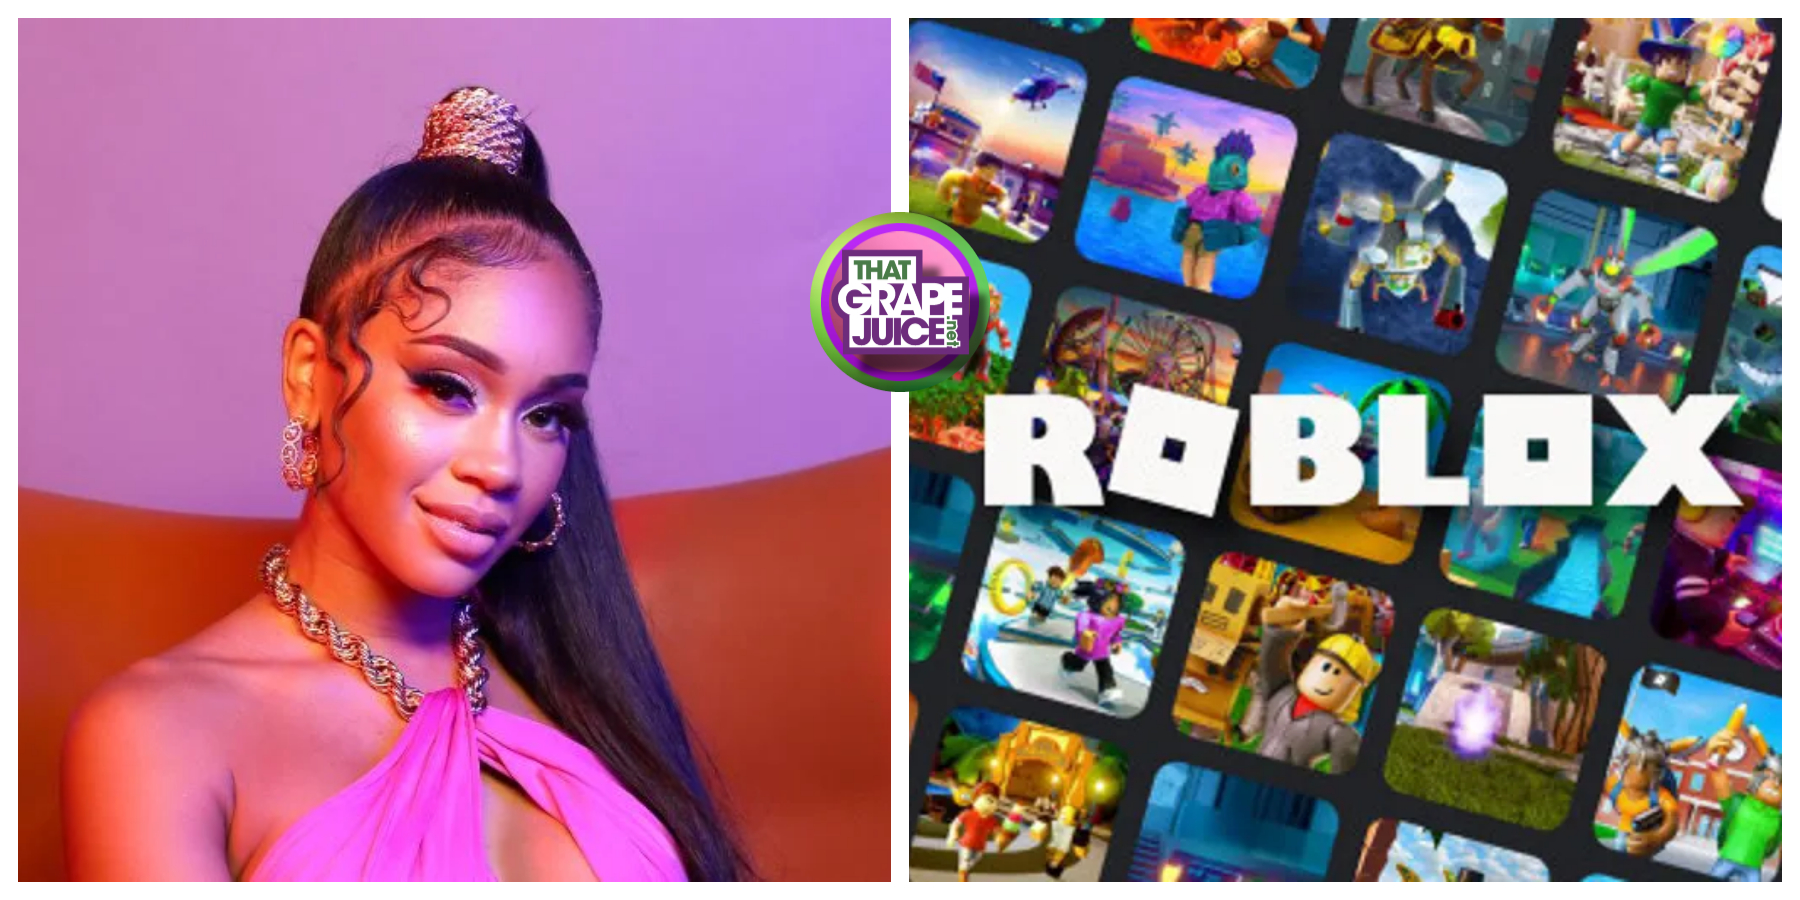 Saweetie Set to Perform Virtual Super Bowl Concert in Roblox That